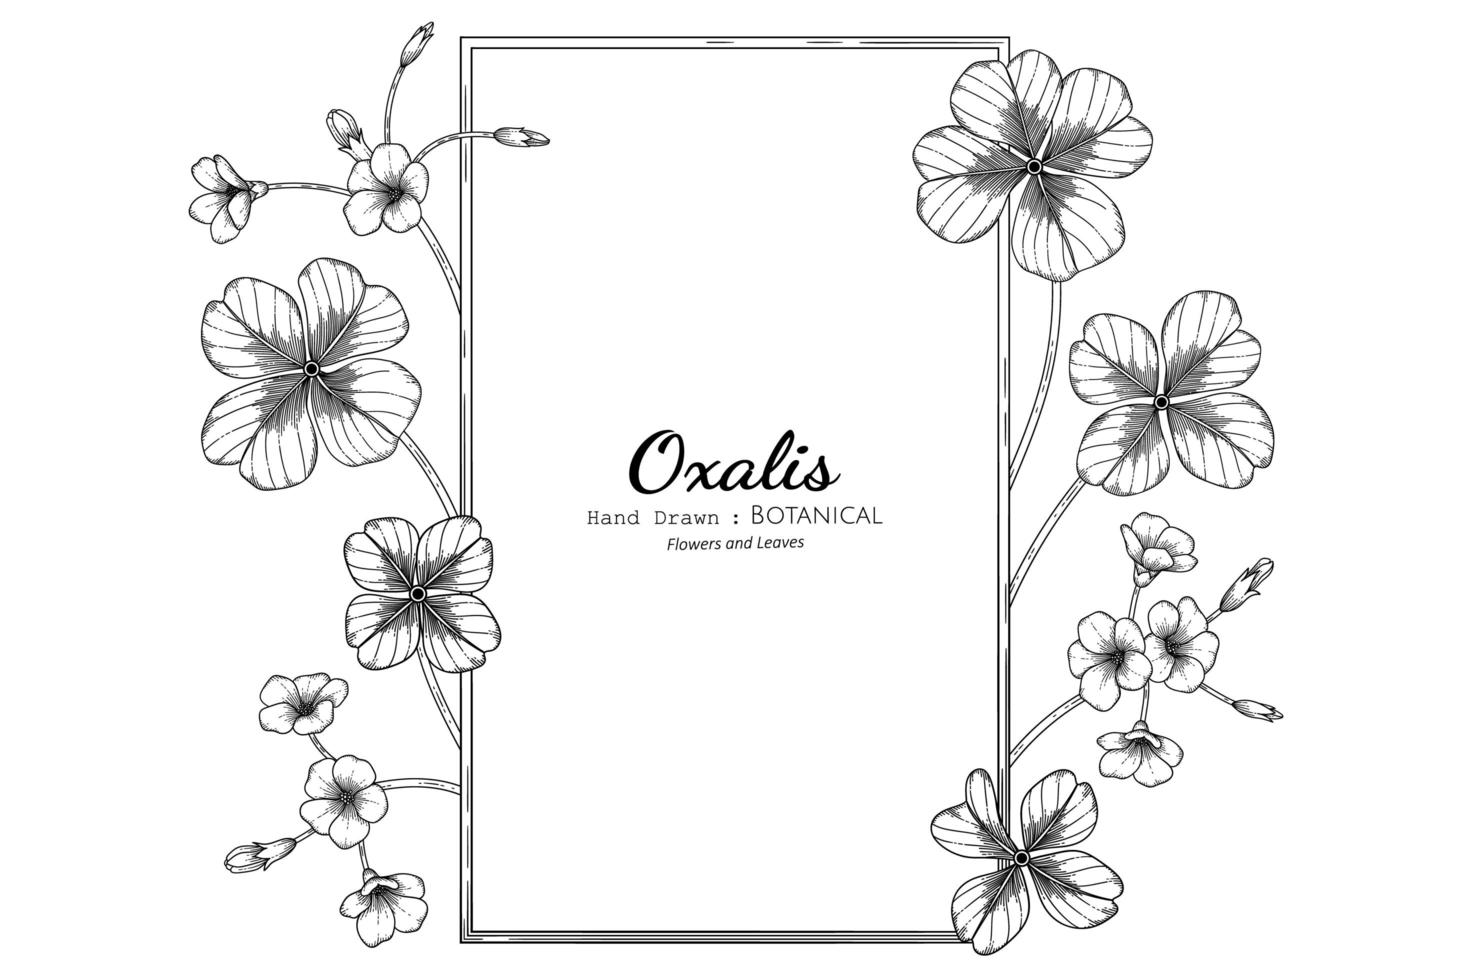 Oxalis flower and leaf hand drawn botanical illustration with line art vector